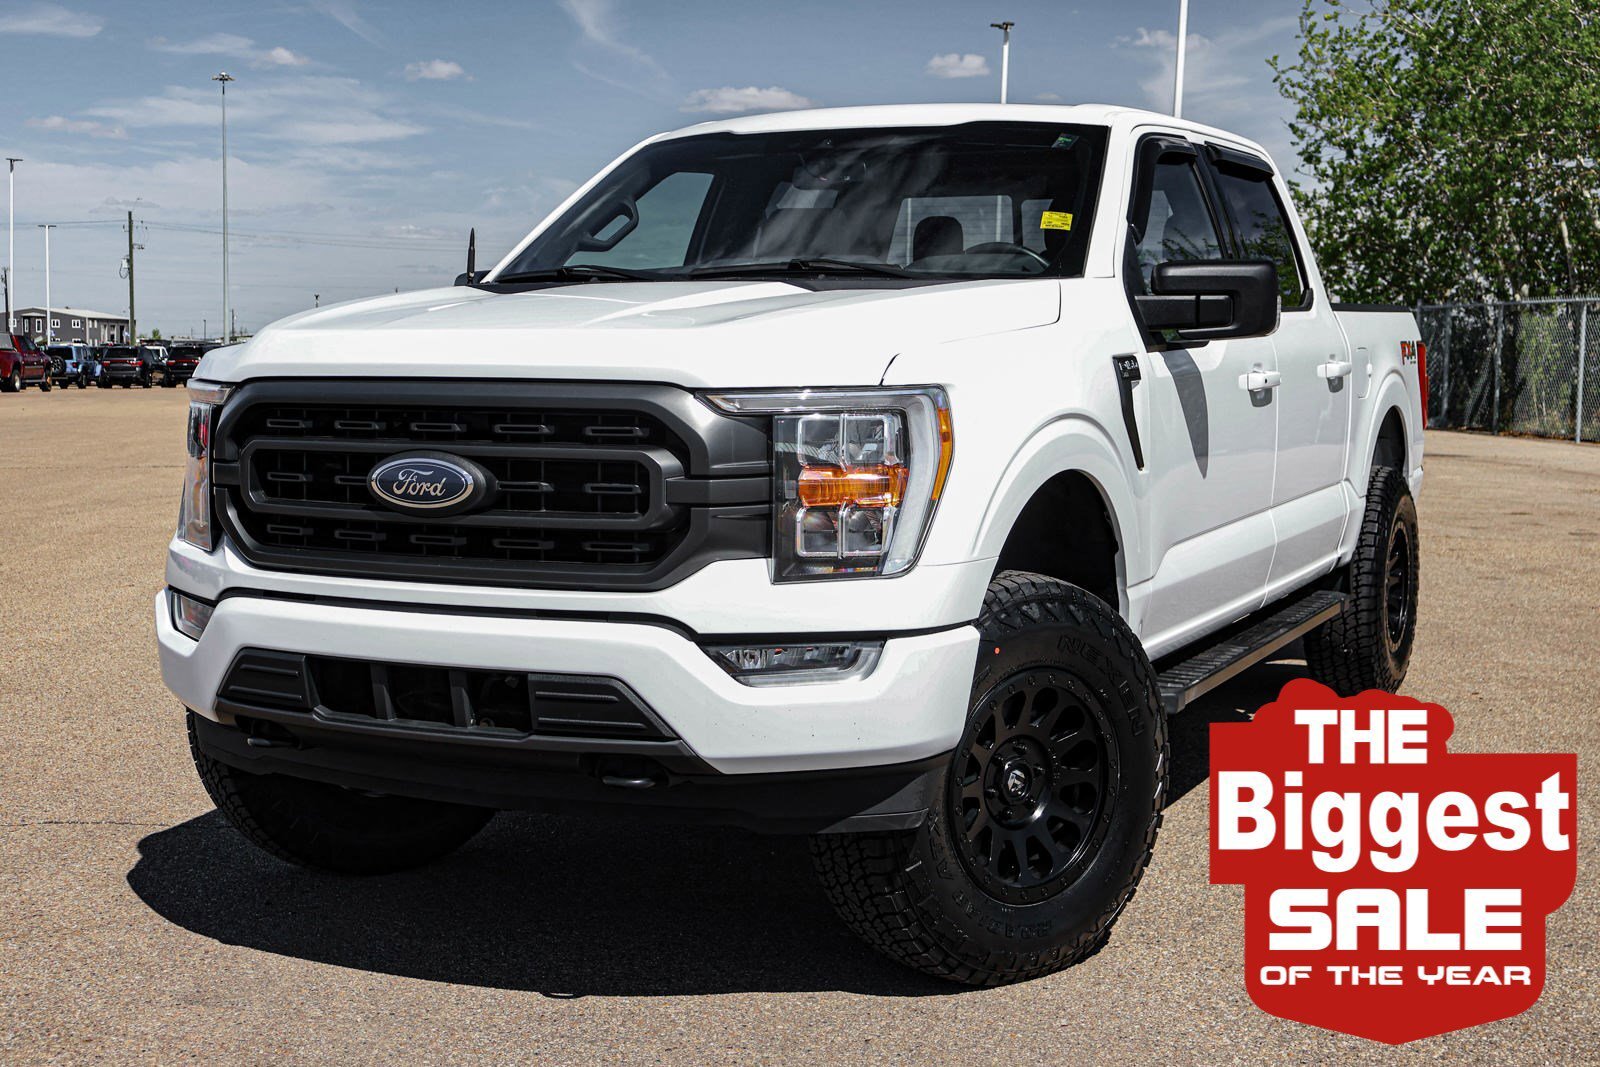 2021 Ford F-150 LIFTED LOADED FX4 CREWCAB 4X4 SUNROOF